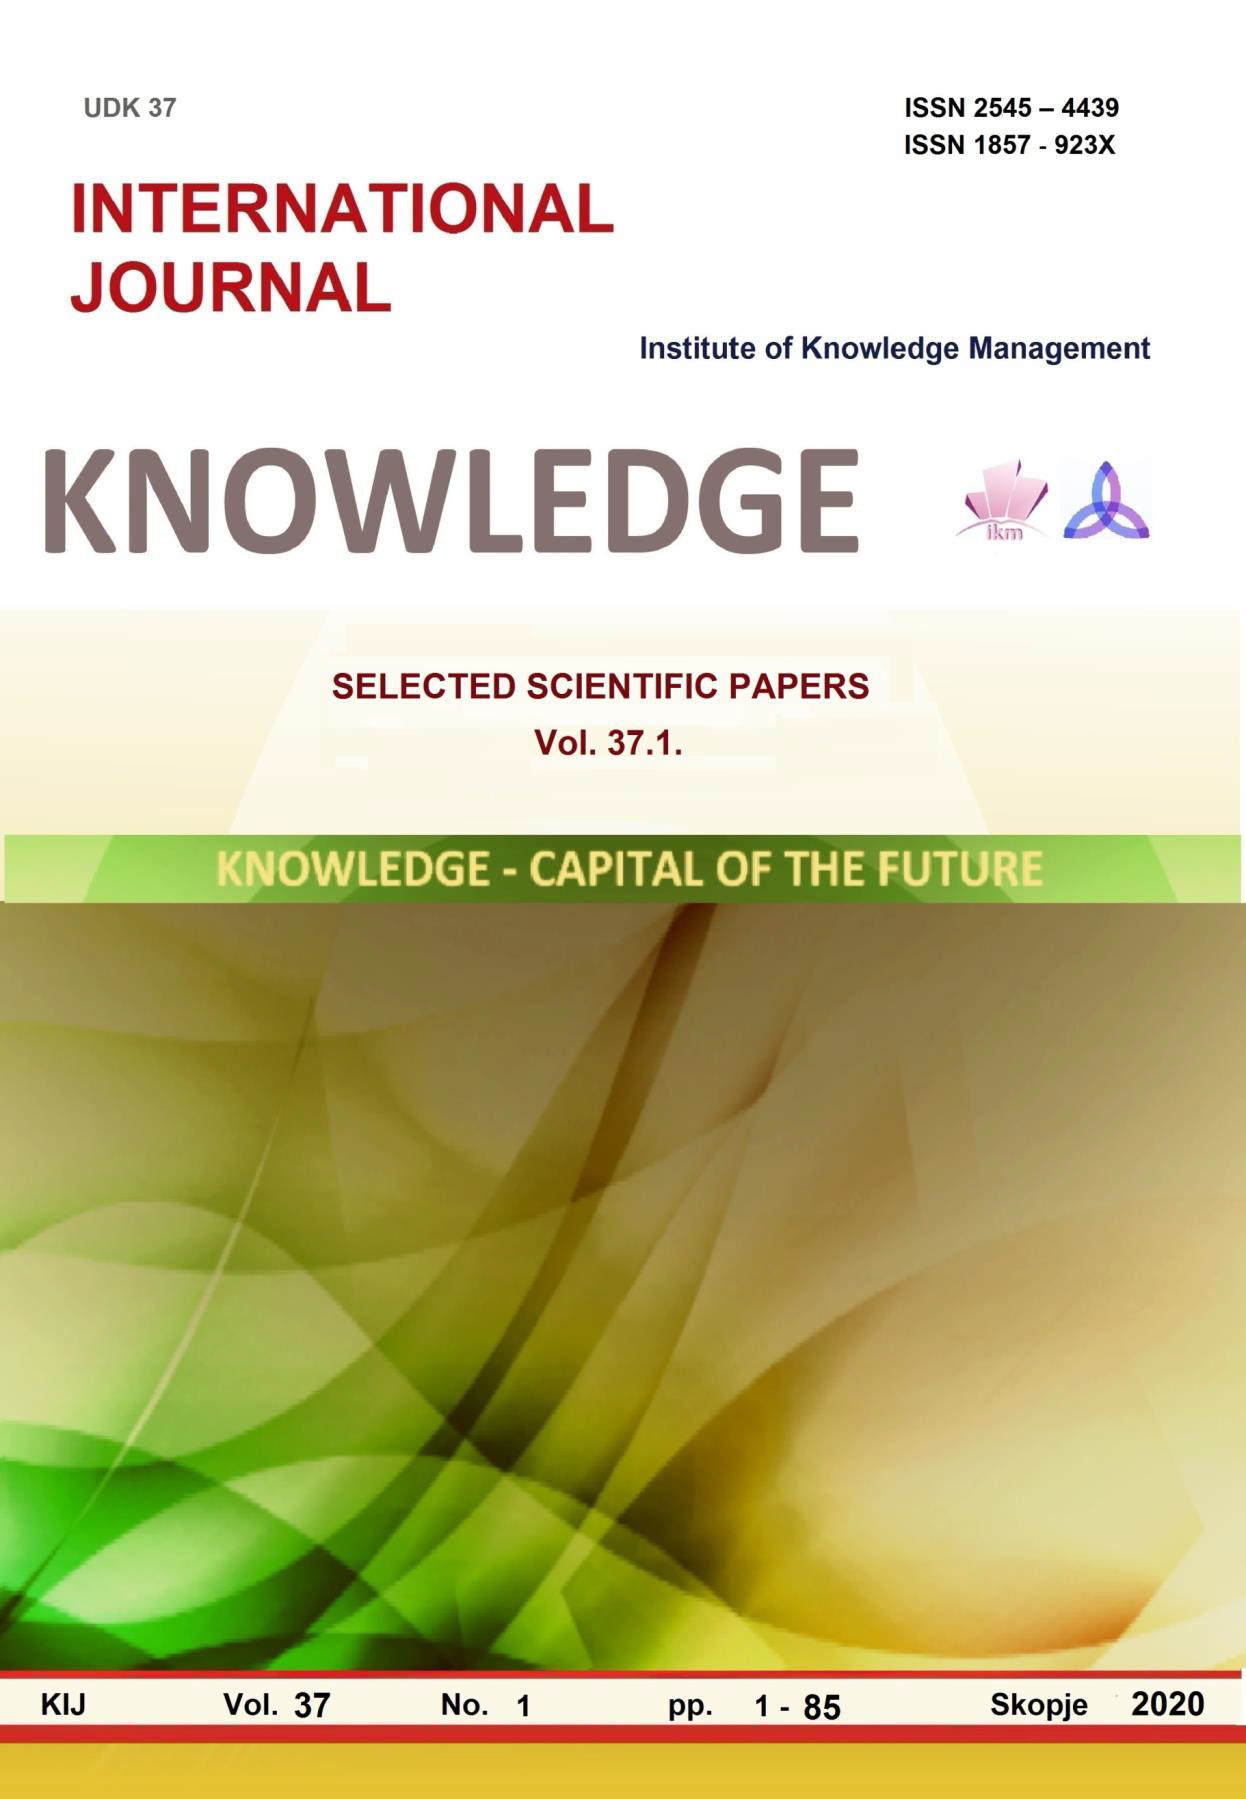 					View Vol. 37 No. 1 (2020): Knowledge - Capital Of The Future
				